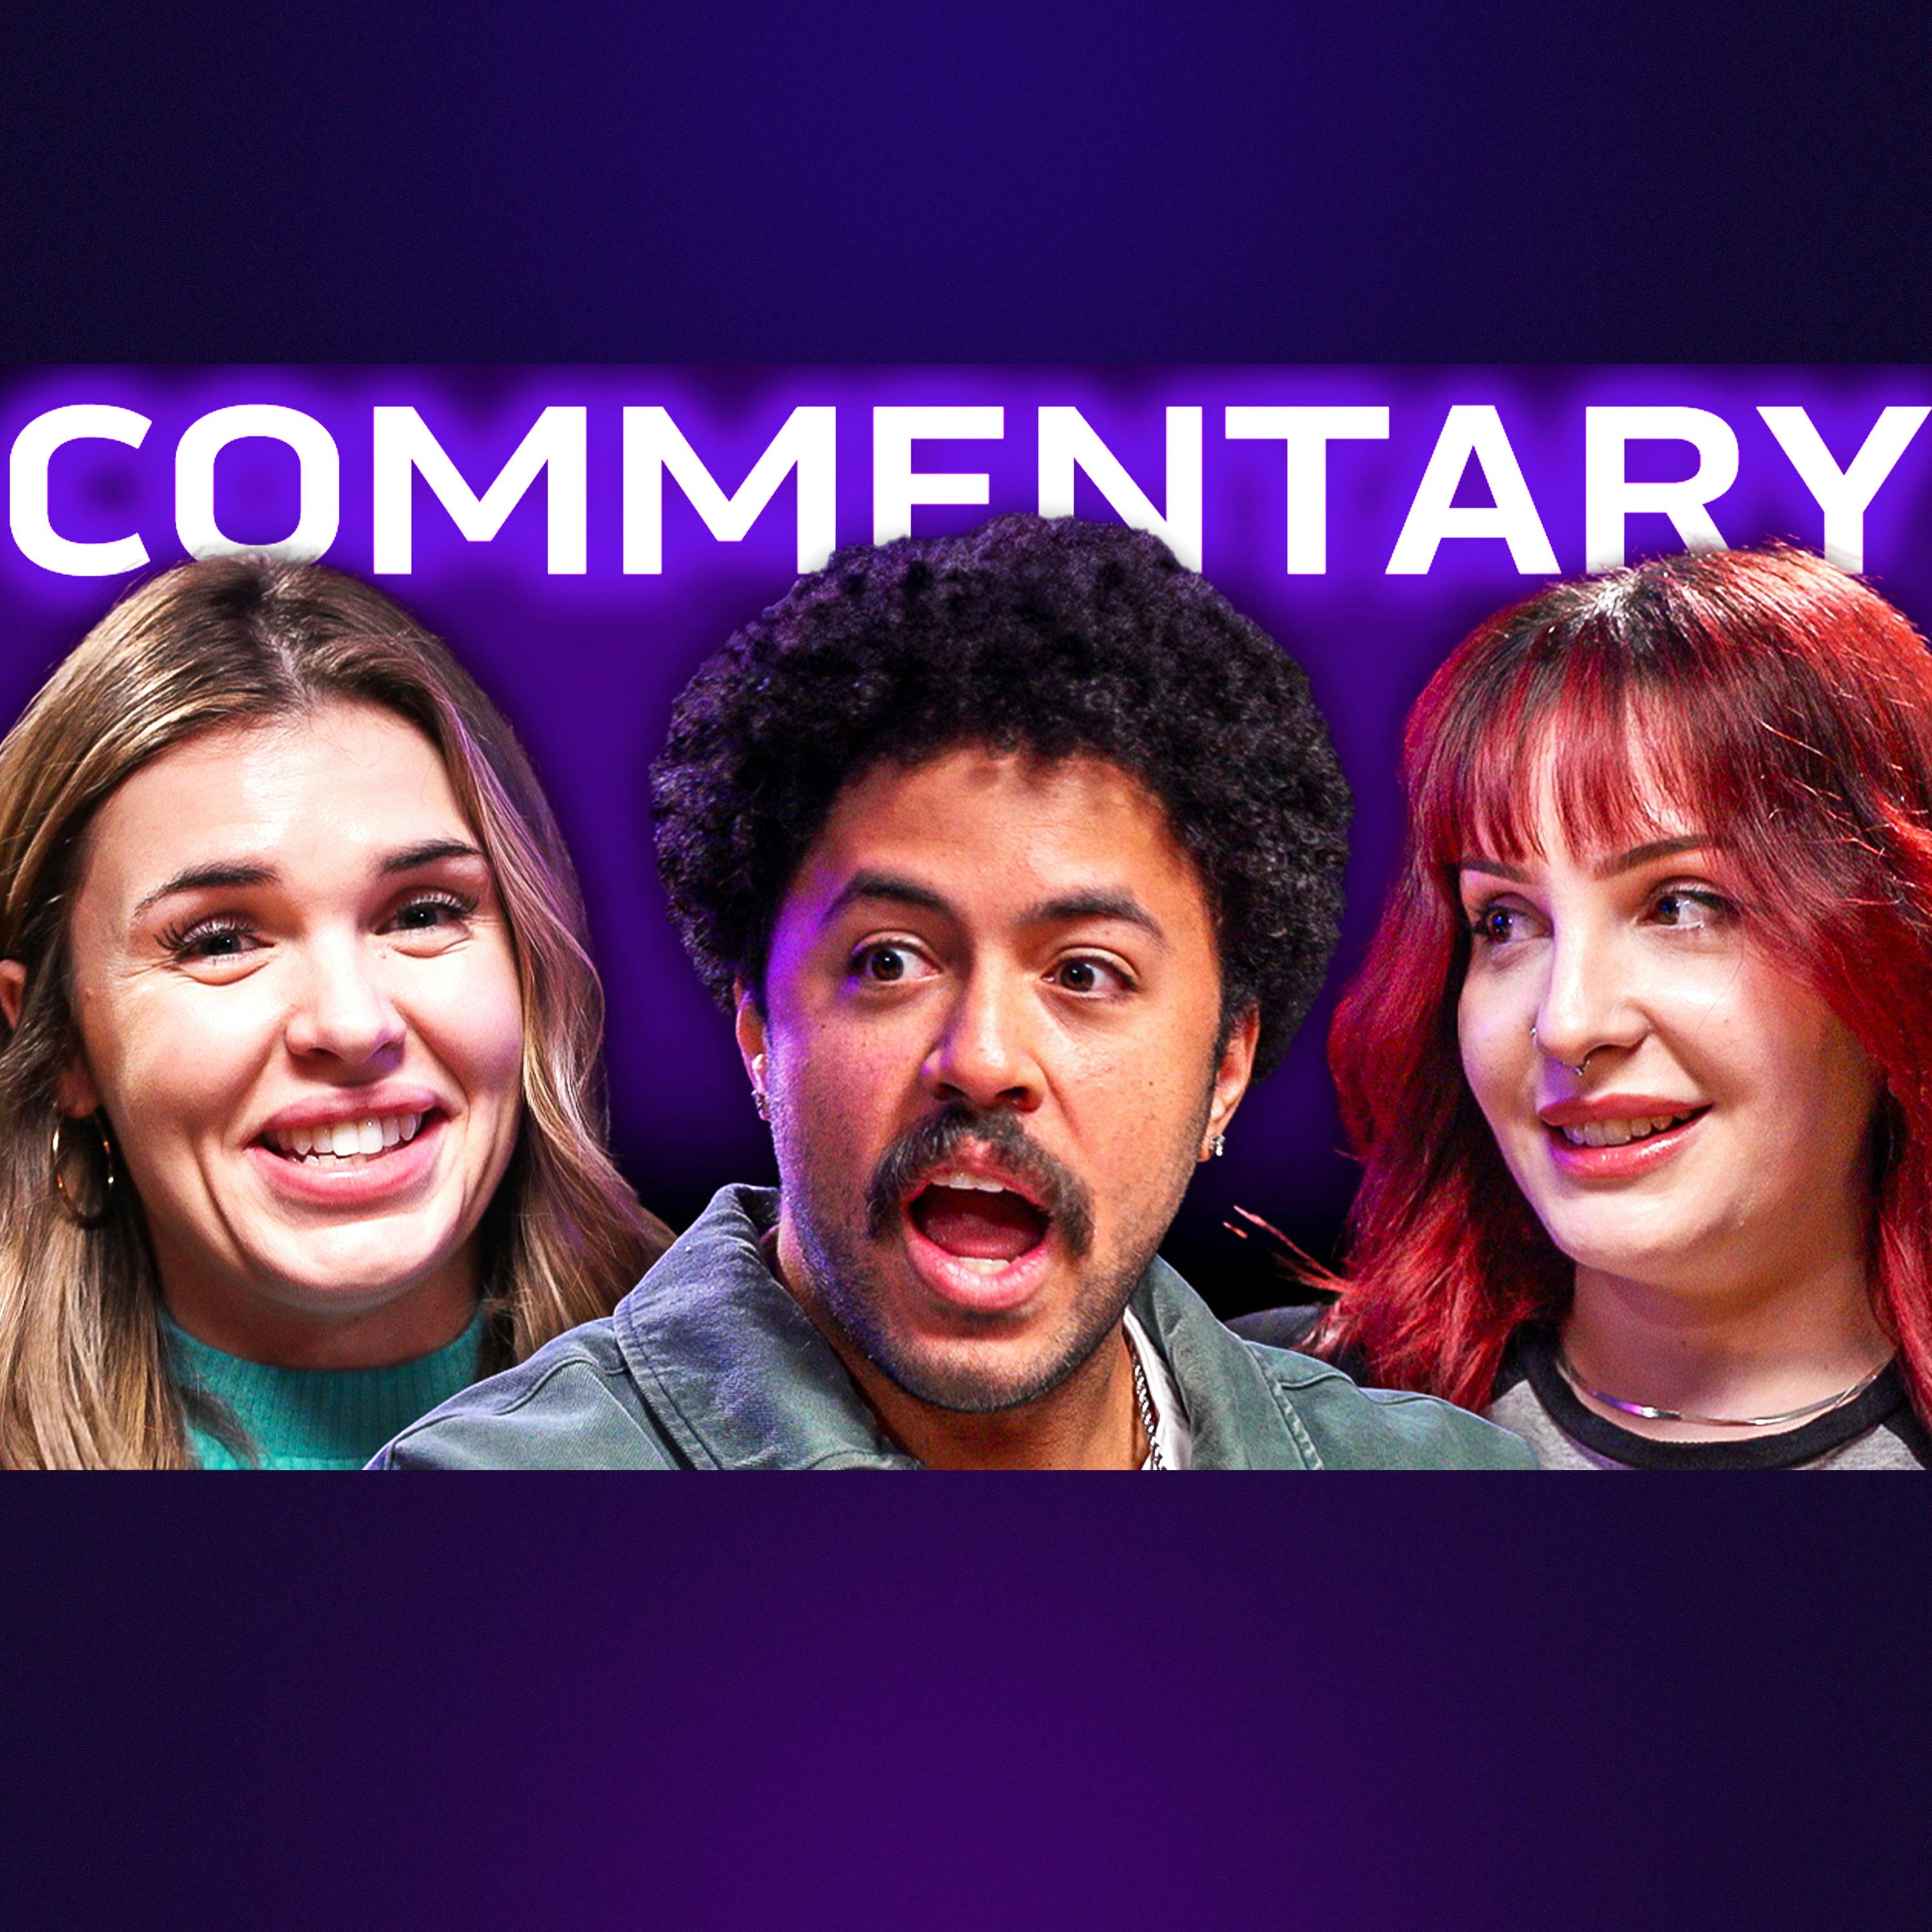 Assumptions about Commentary YouTubers